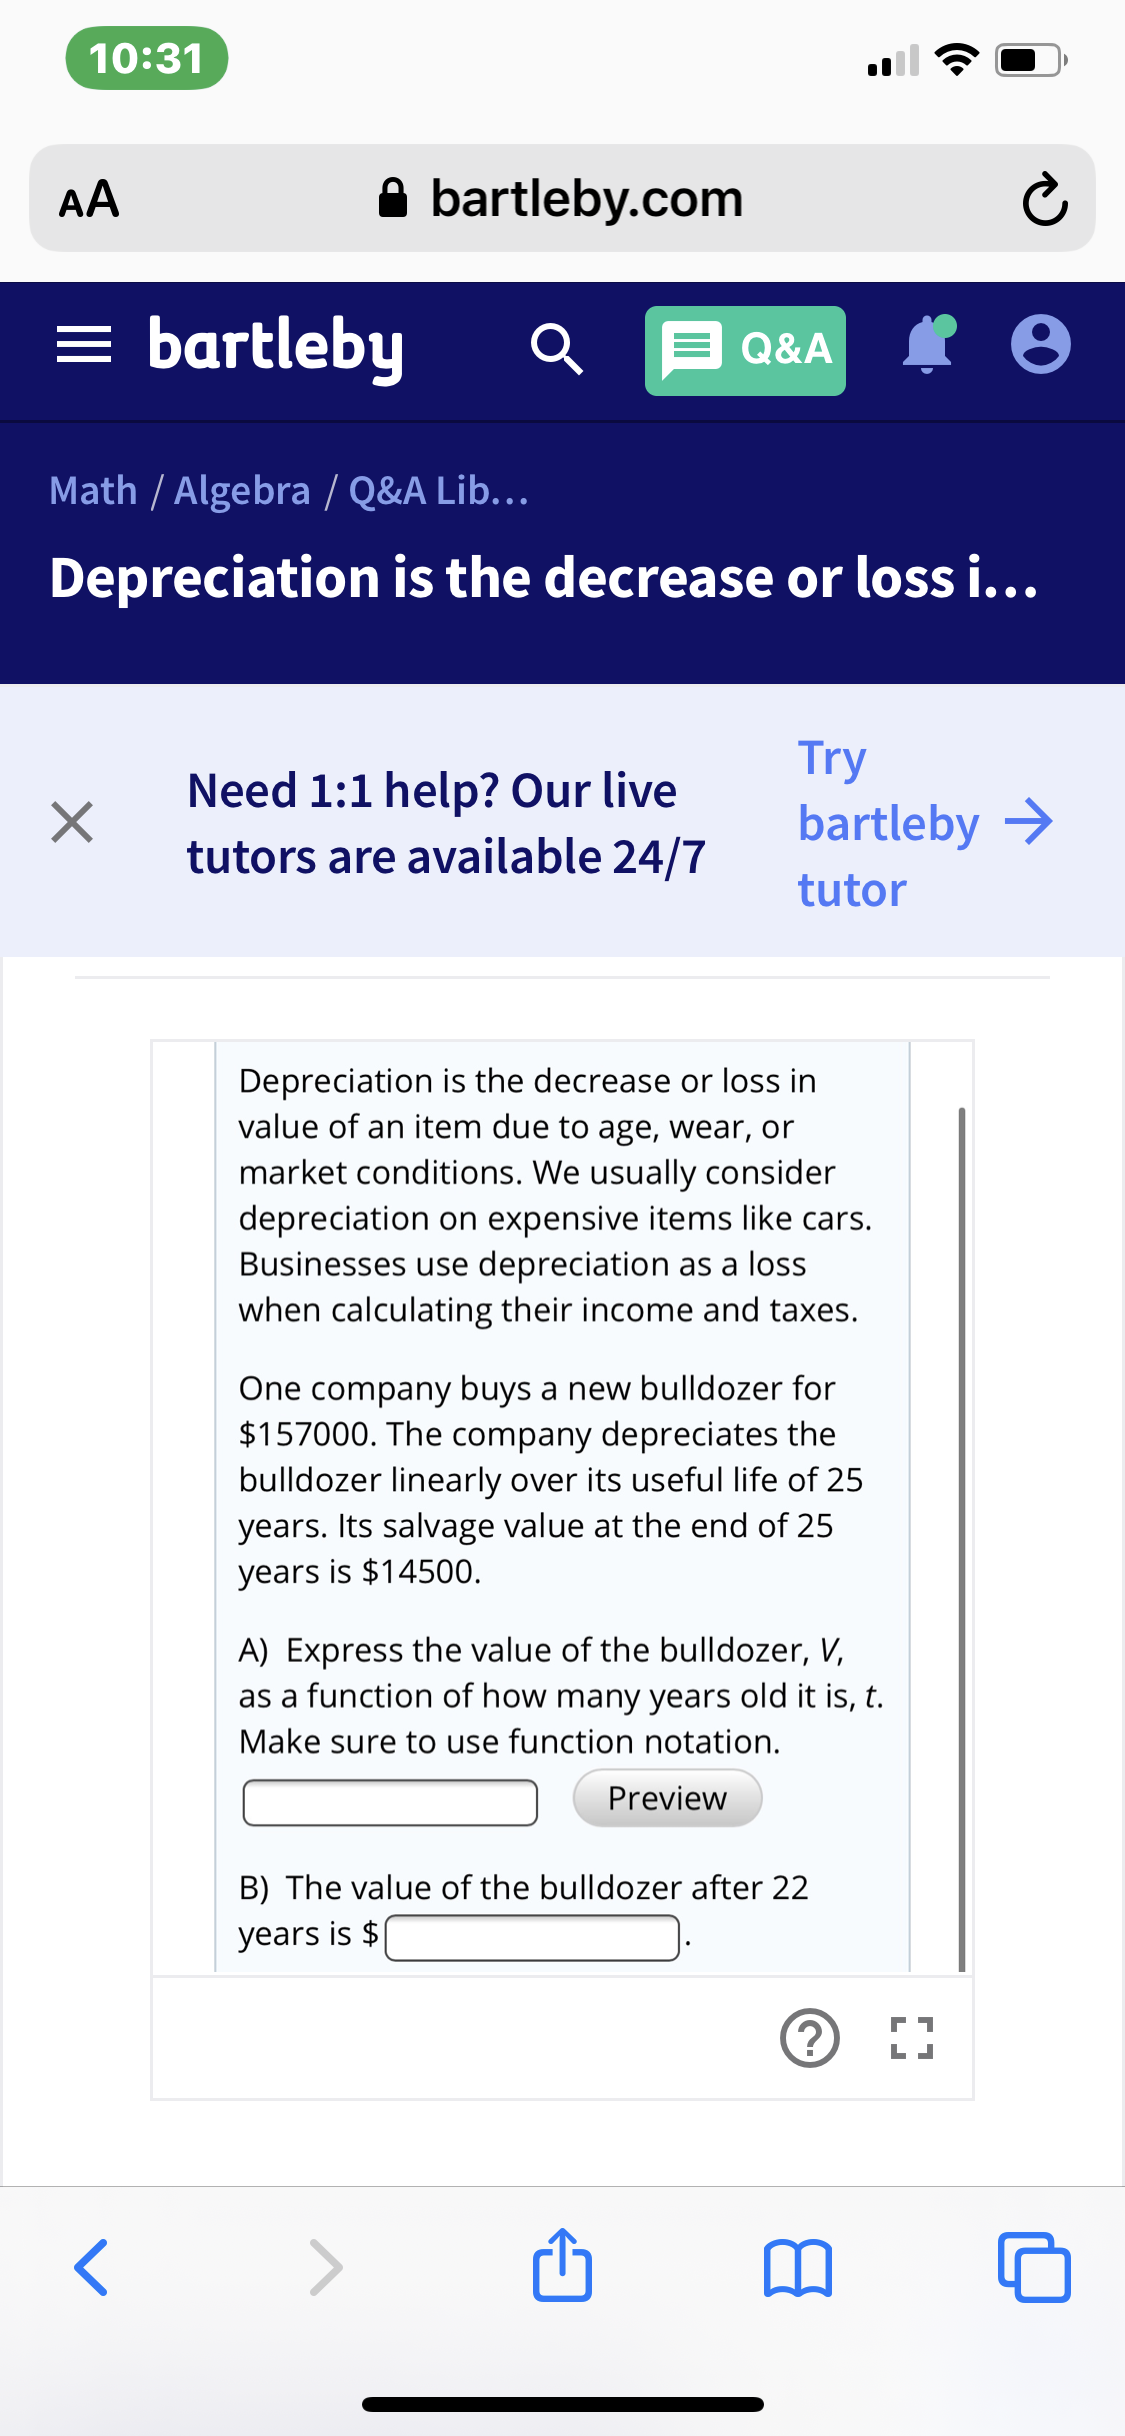 10:31
A bartleby.com
AA
= bartleby
Q E Q&A
Math / Algebra / Q&A Lib...
Depreciation is the decrease or loss i...
Try
bartleby >
Need 1:1 help? Our live
tutors are available 24/7
tutor
Depreciation is the decrease or loss in
value of an item due to age, wear, or
market conditions. We usually consider
depreciation on expensive items like cars.
Businesses use depreciation as a loss
when calculating their income and taxes.
One company buys a new bulldozer for
$157000. The company depreciates the
bulldozer linearly over its useful life of 25
years. Its salvage value at the end of 25
years is $14500.
A) Express the value of the bulldozer, V,
as a function of how many years old it is, t.
Make sure to use function notation.
Preview
B) The value of the bulldozer after 22
years is $
